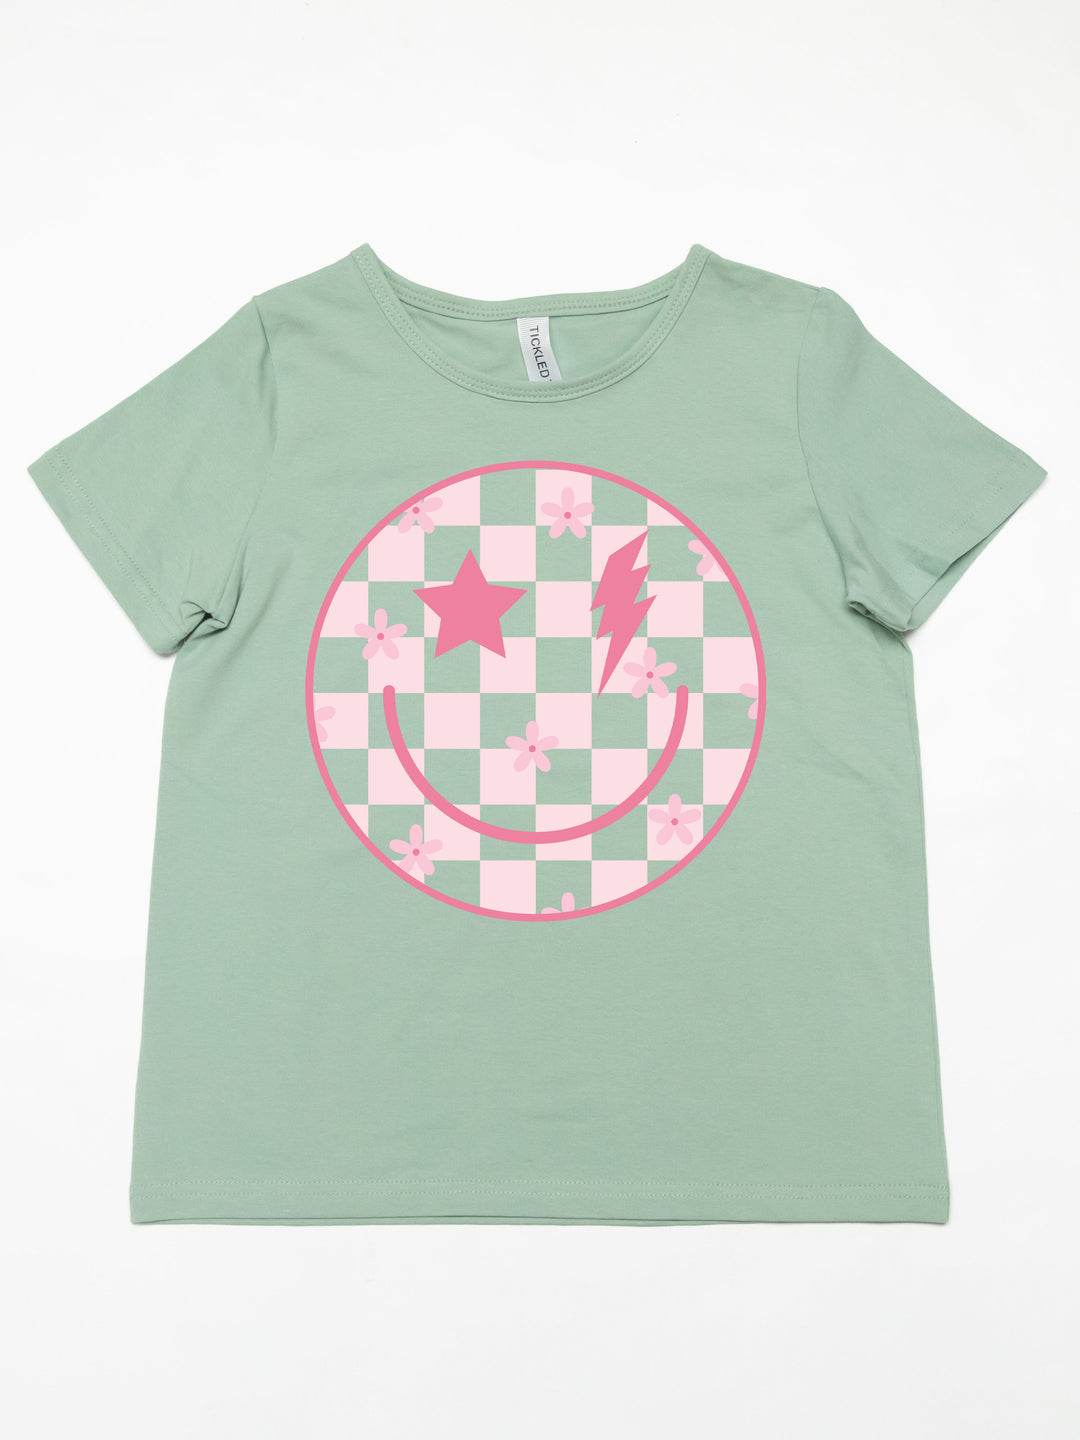 Daisy Checker Smiley Face Kids Graphic Tee